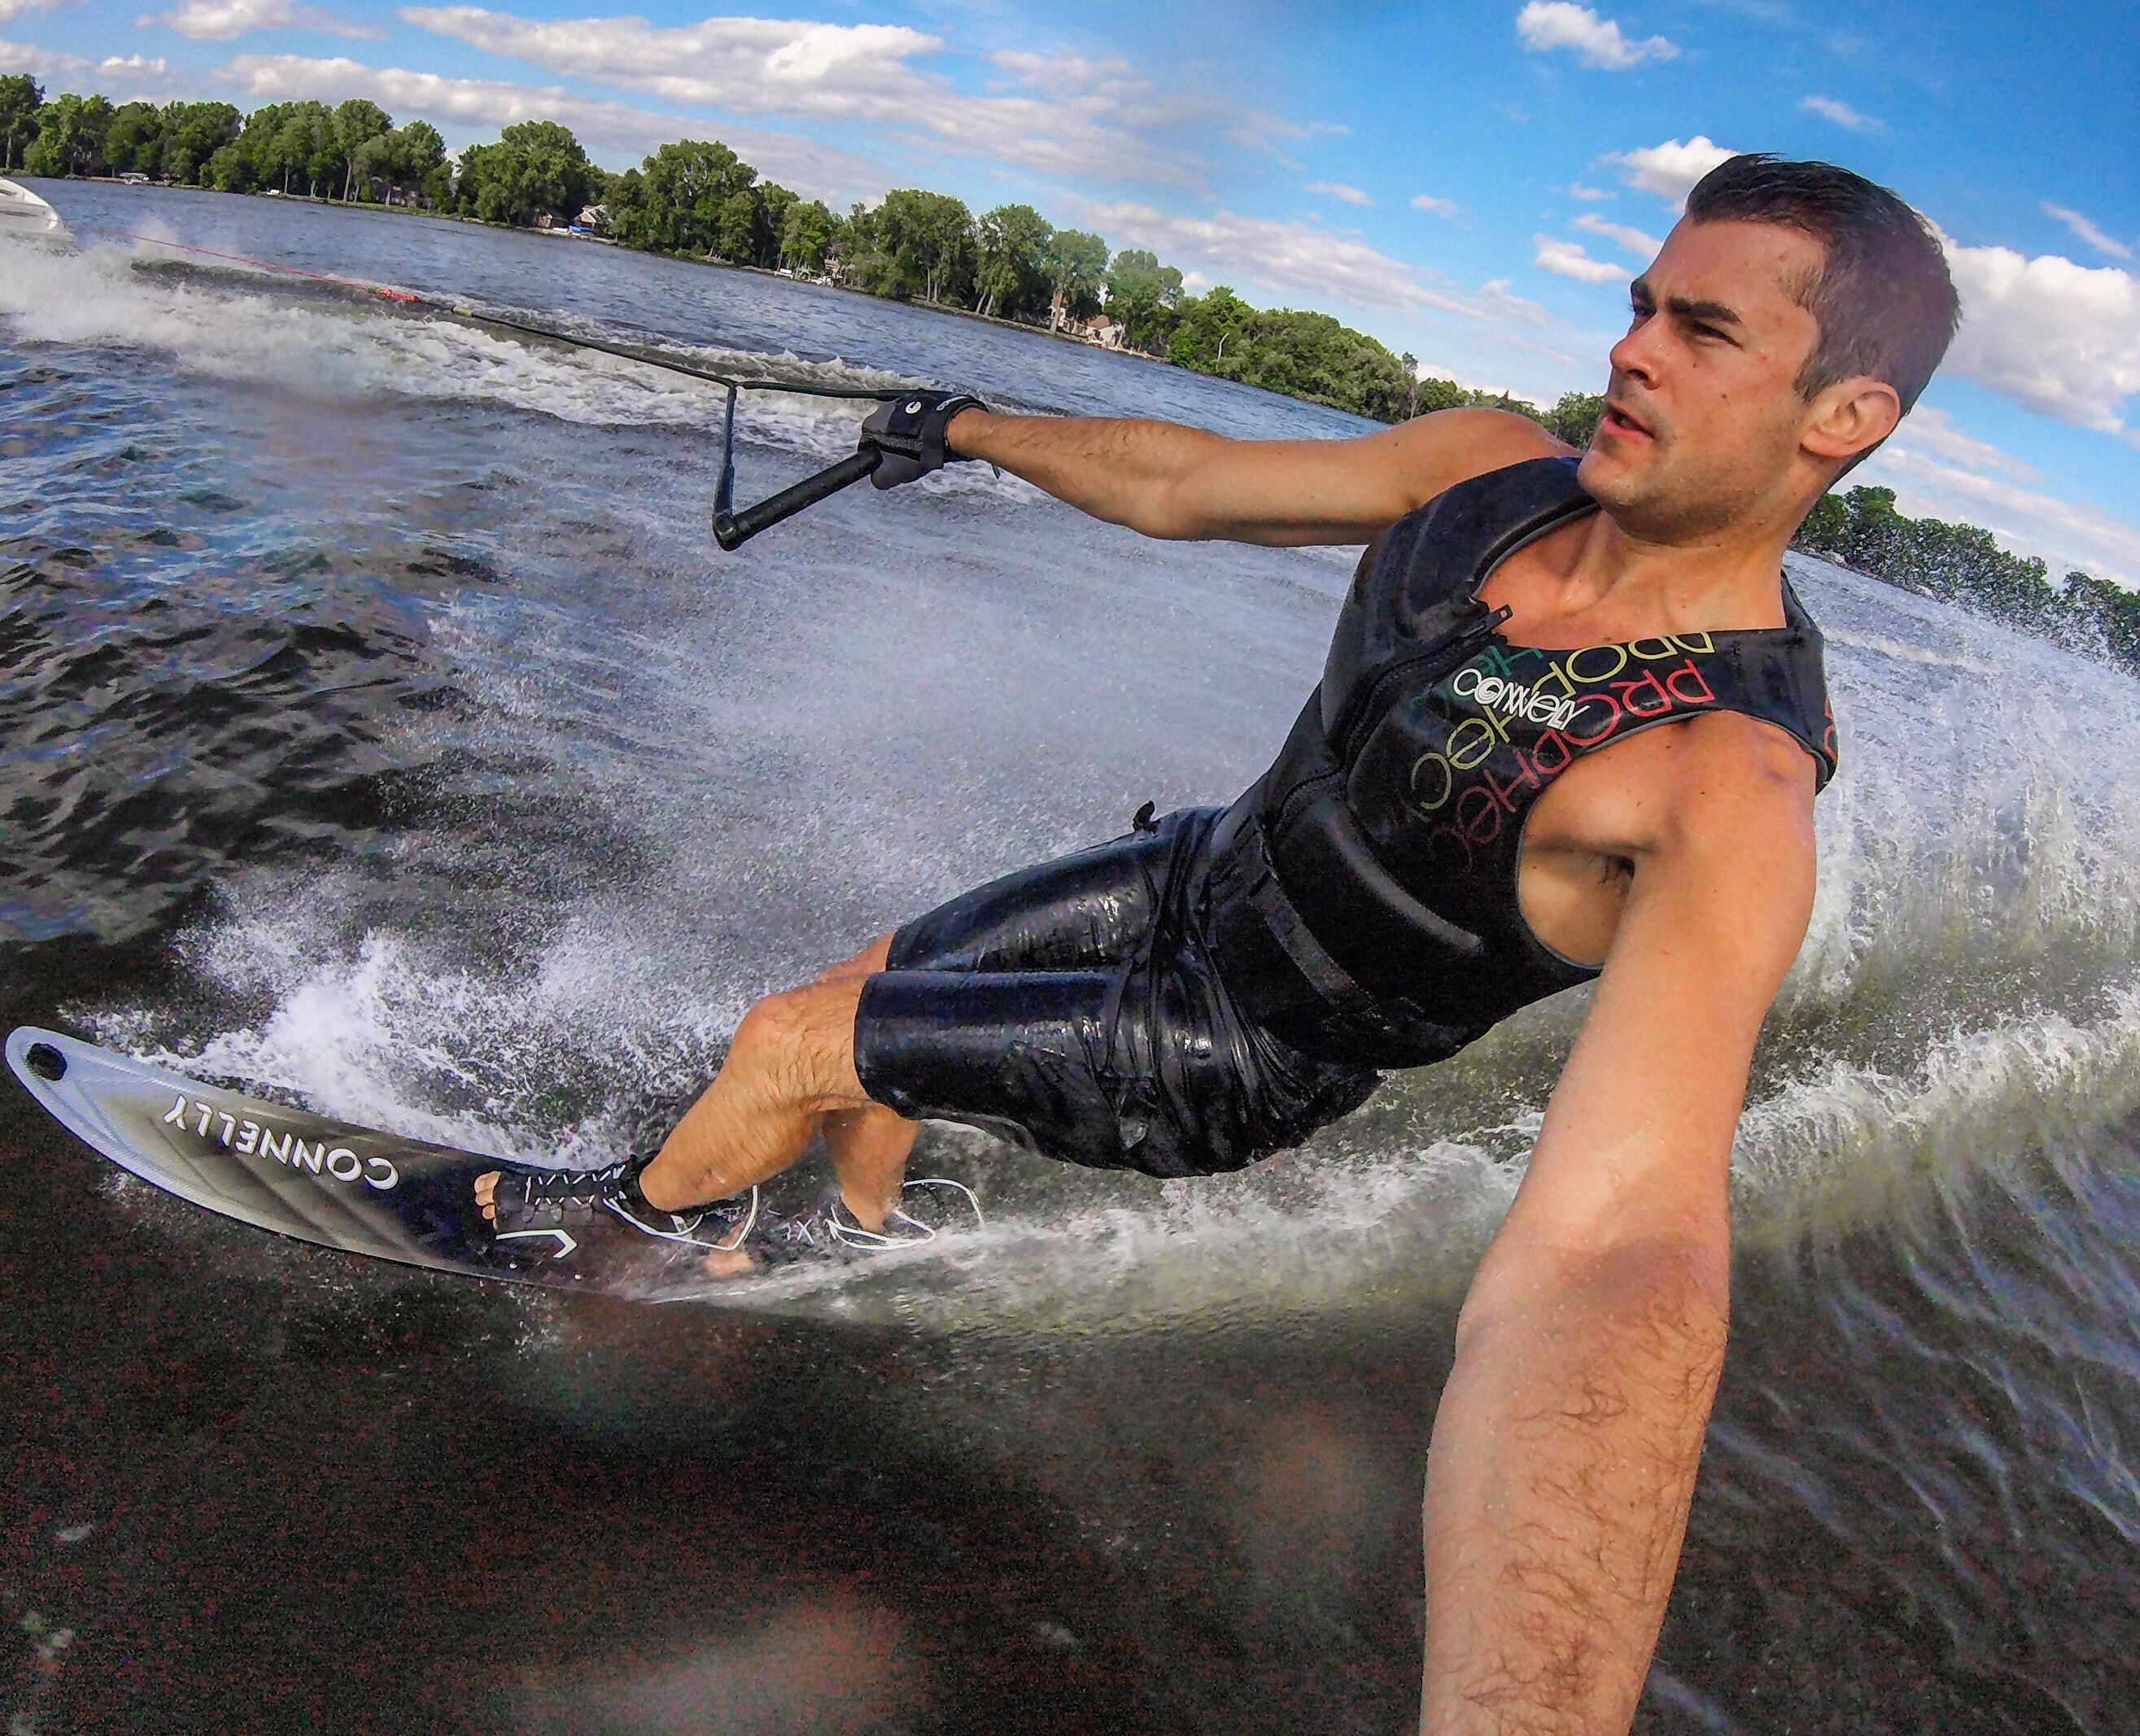 man holding tether while water skiing